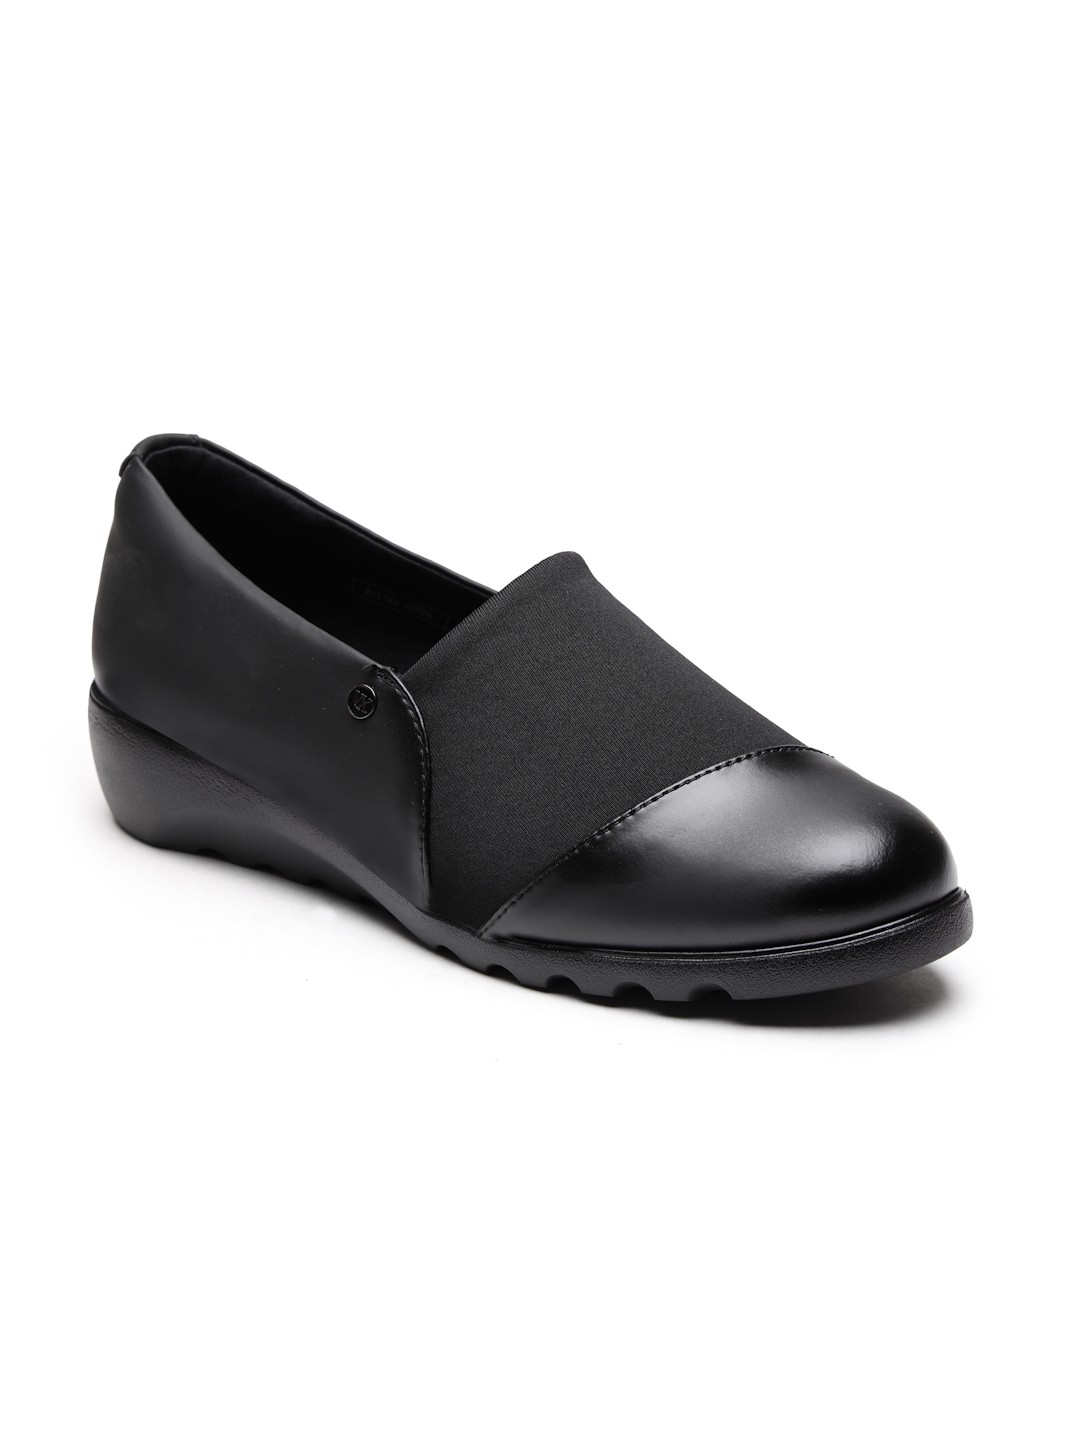 Buy Von Wellx Germany Comfort Women's Black Casual Shoes Ayla Online in Bangalore